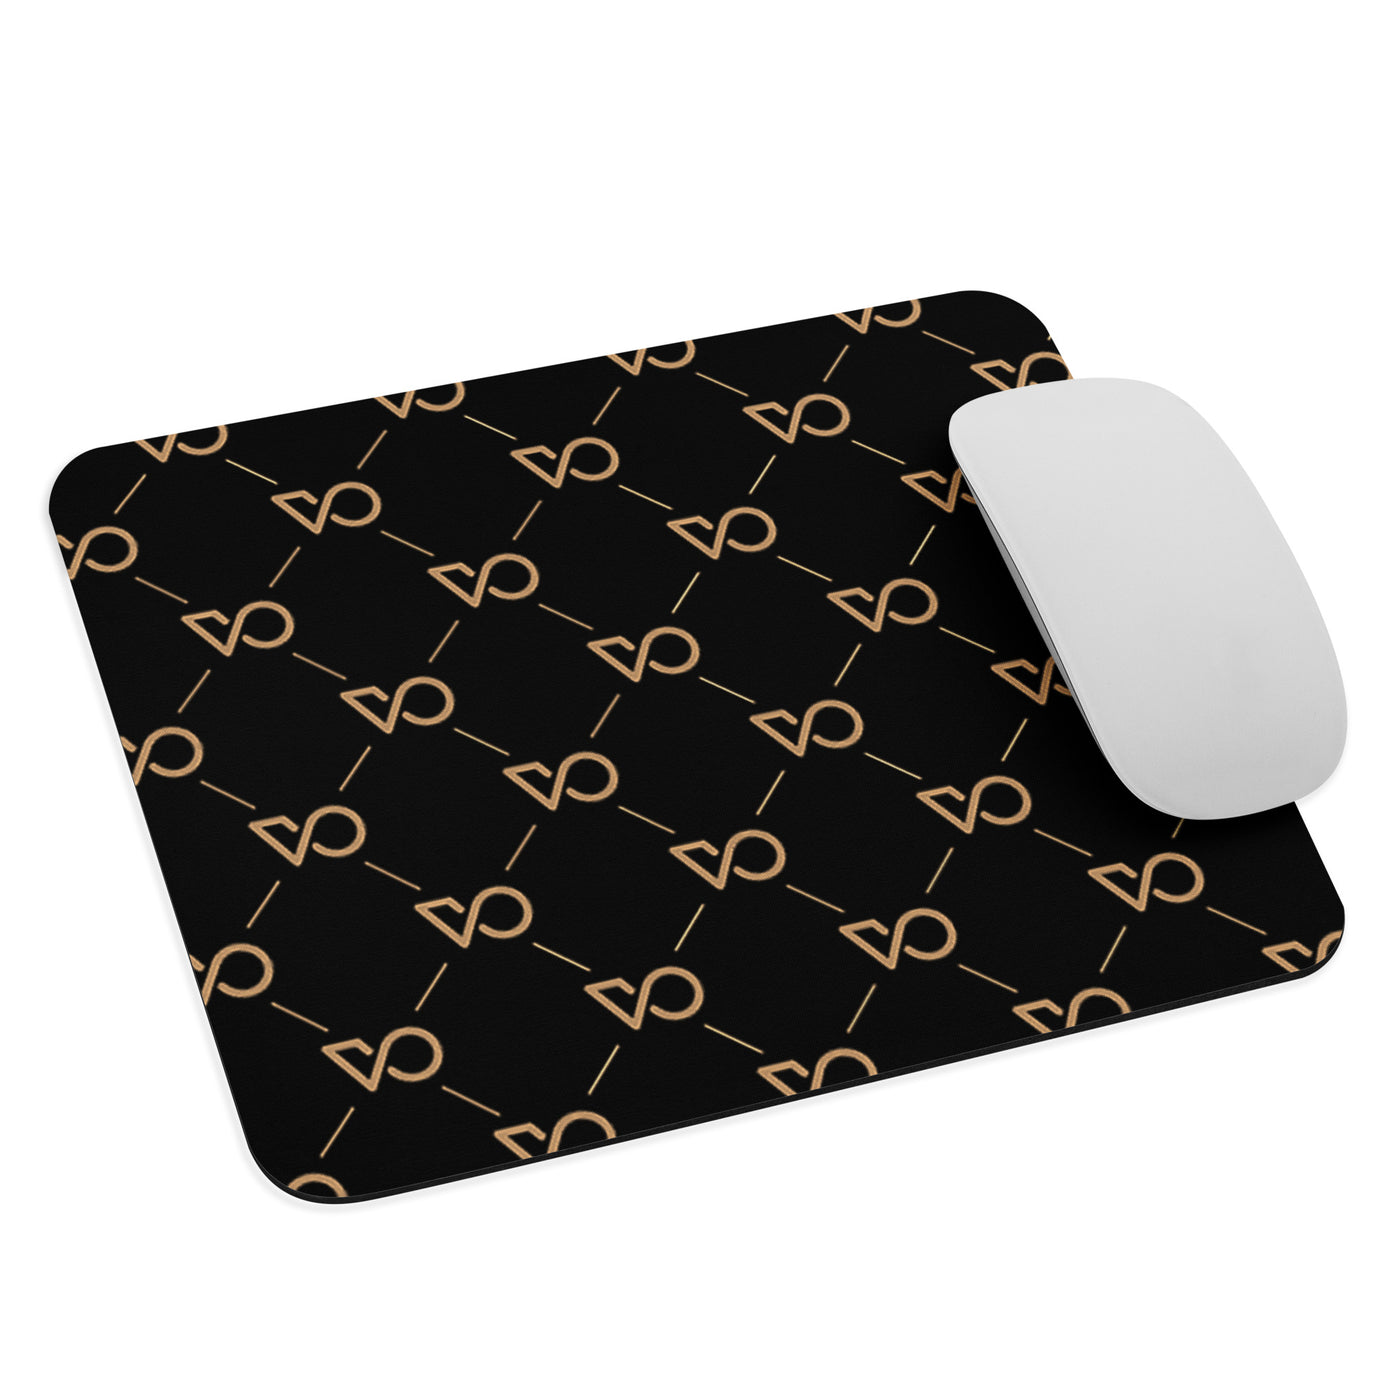 GOLD VO Mouse pad black